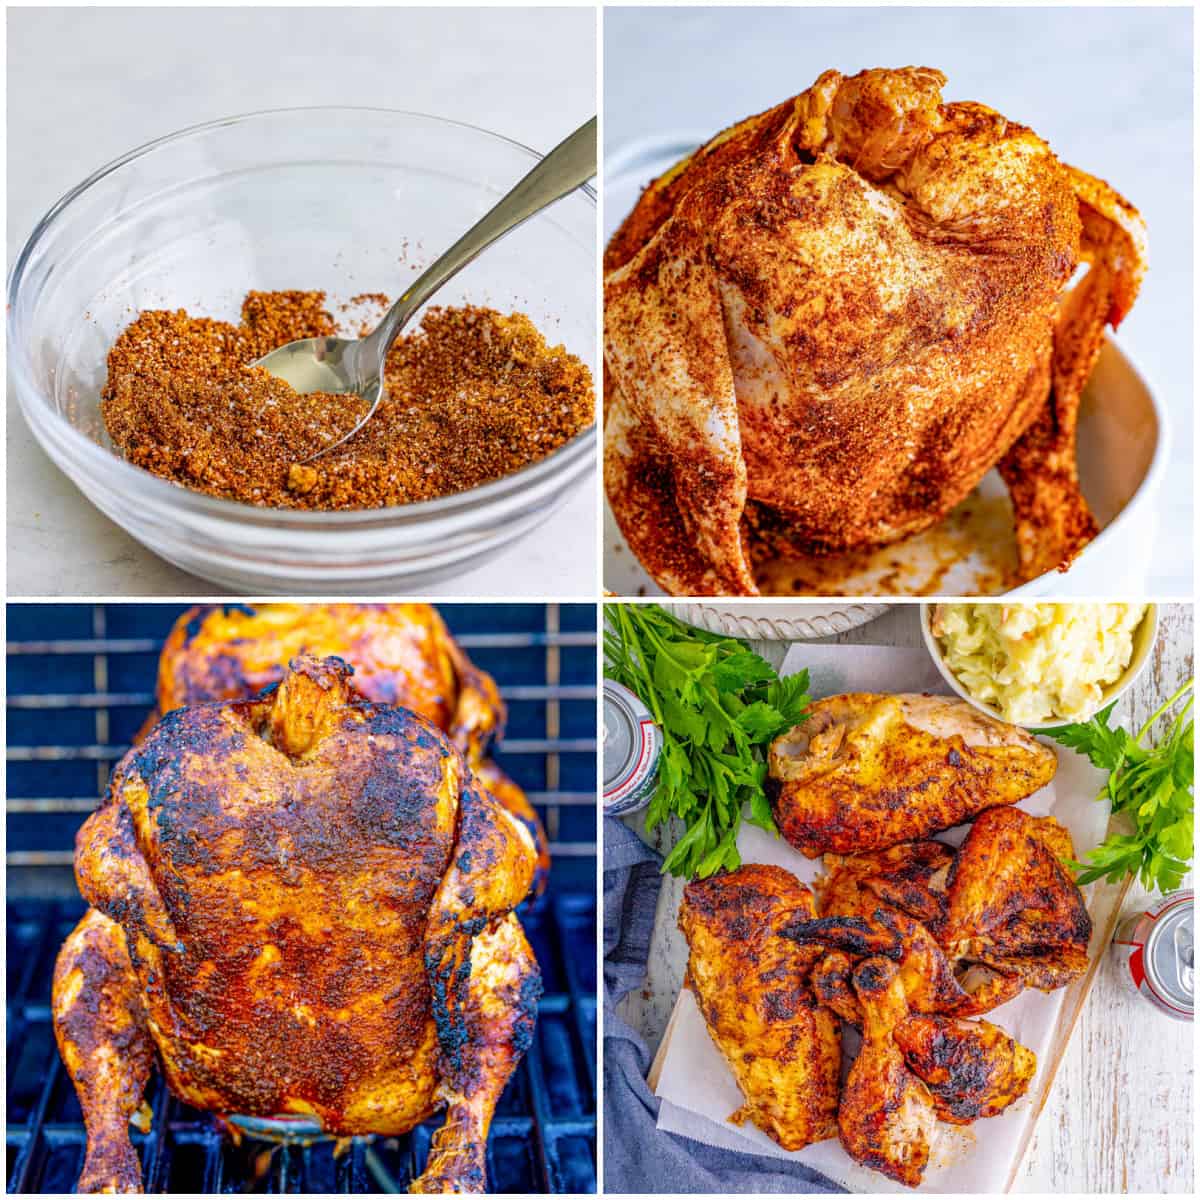 Step by step photos on how to make a Beer Can Chicken.